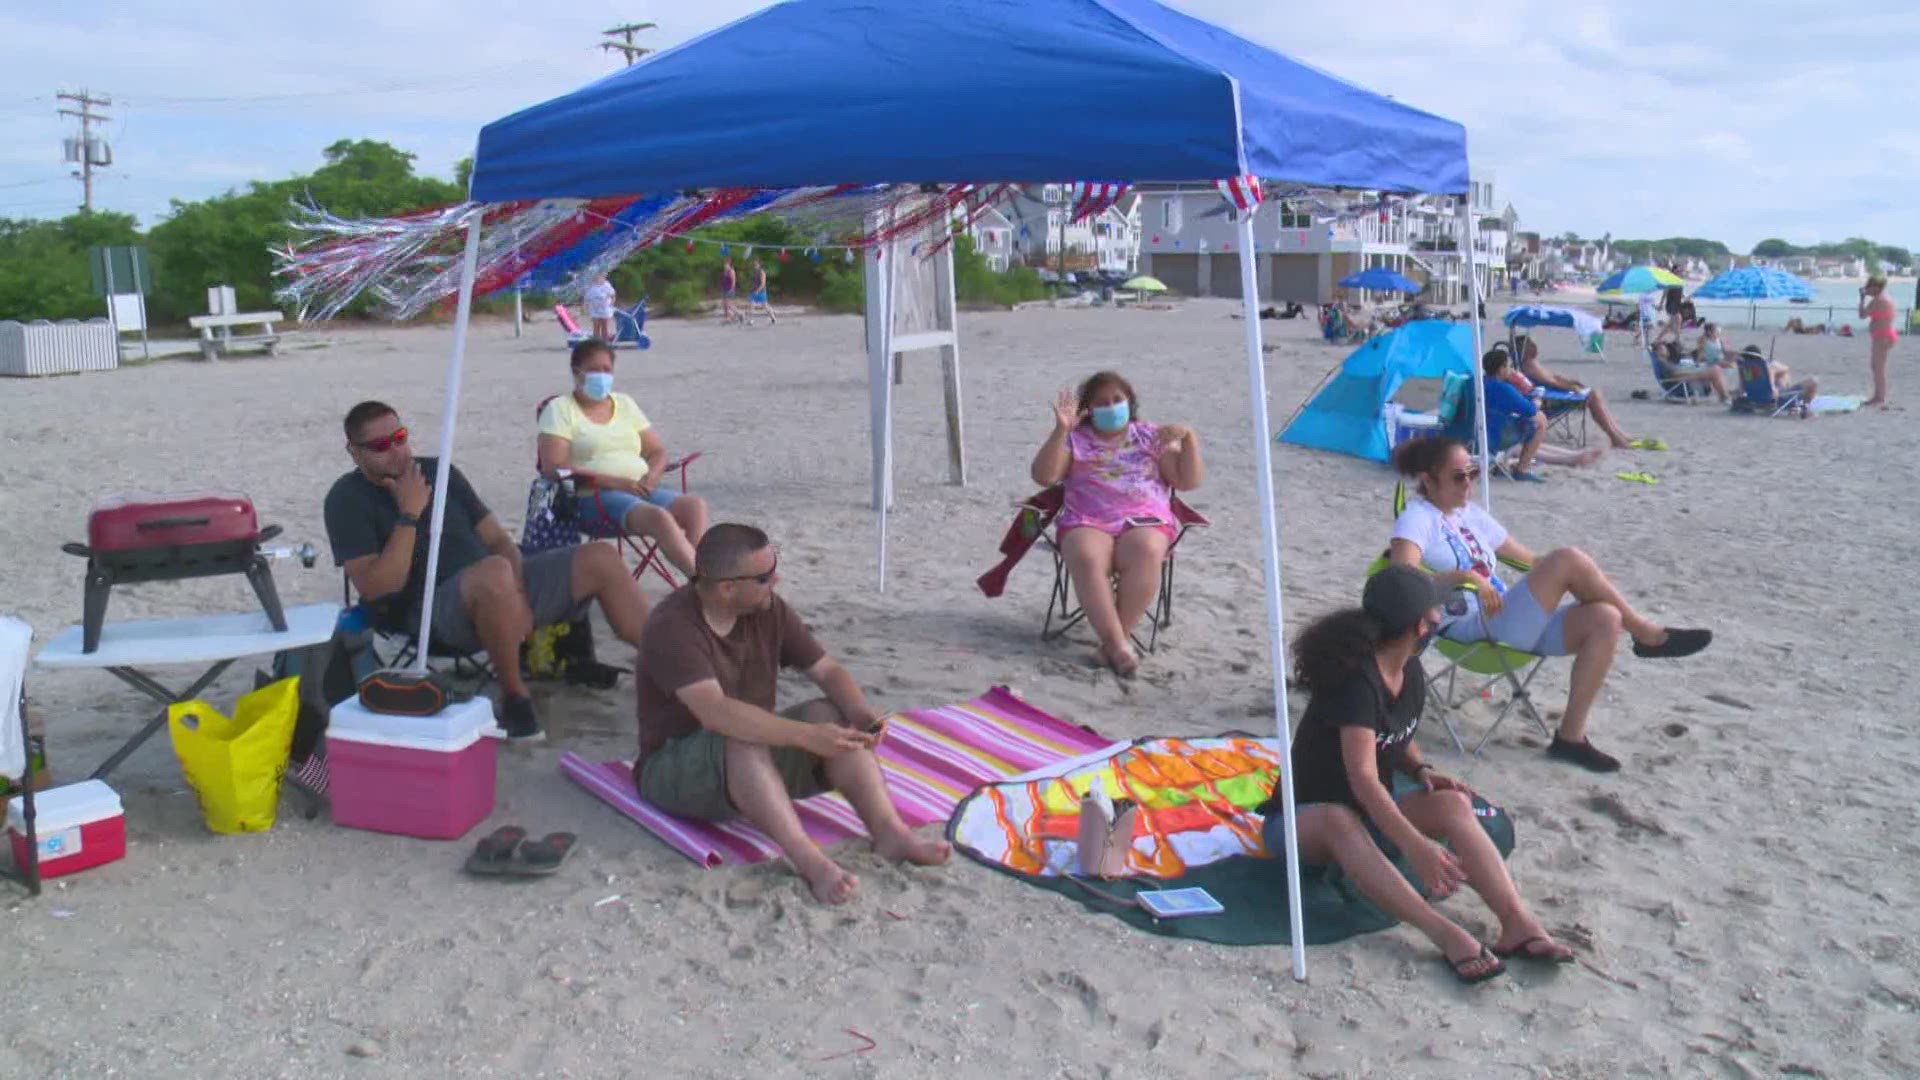 Beaches busy in Connecticut for July 4th